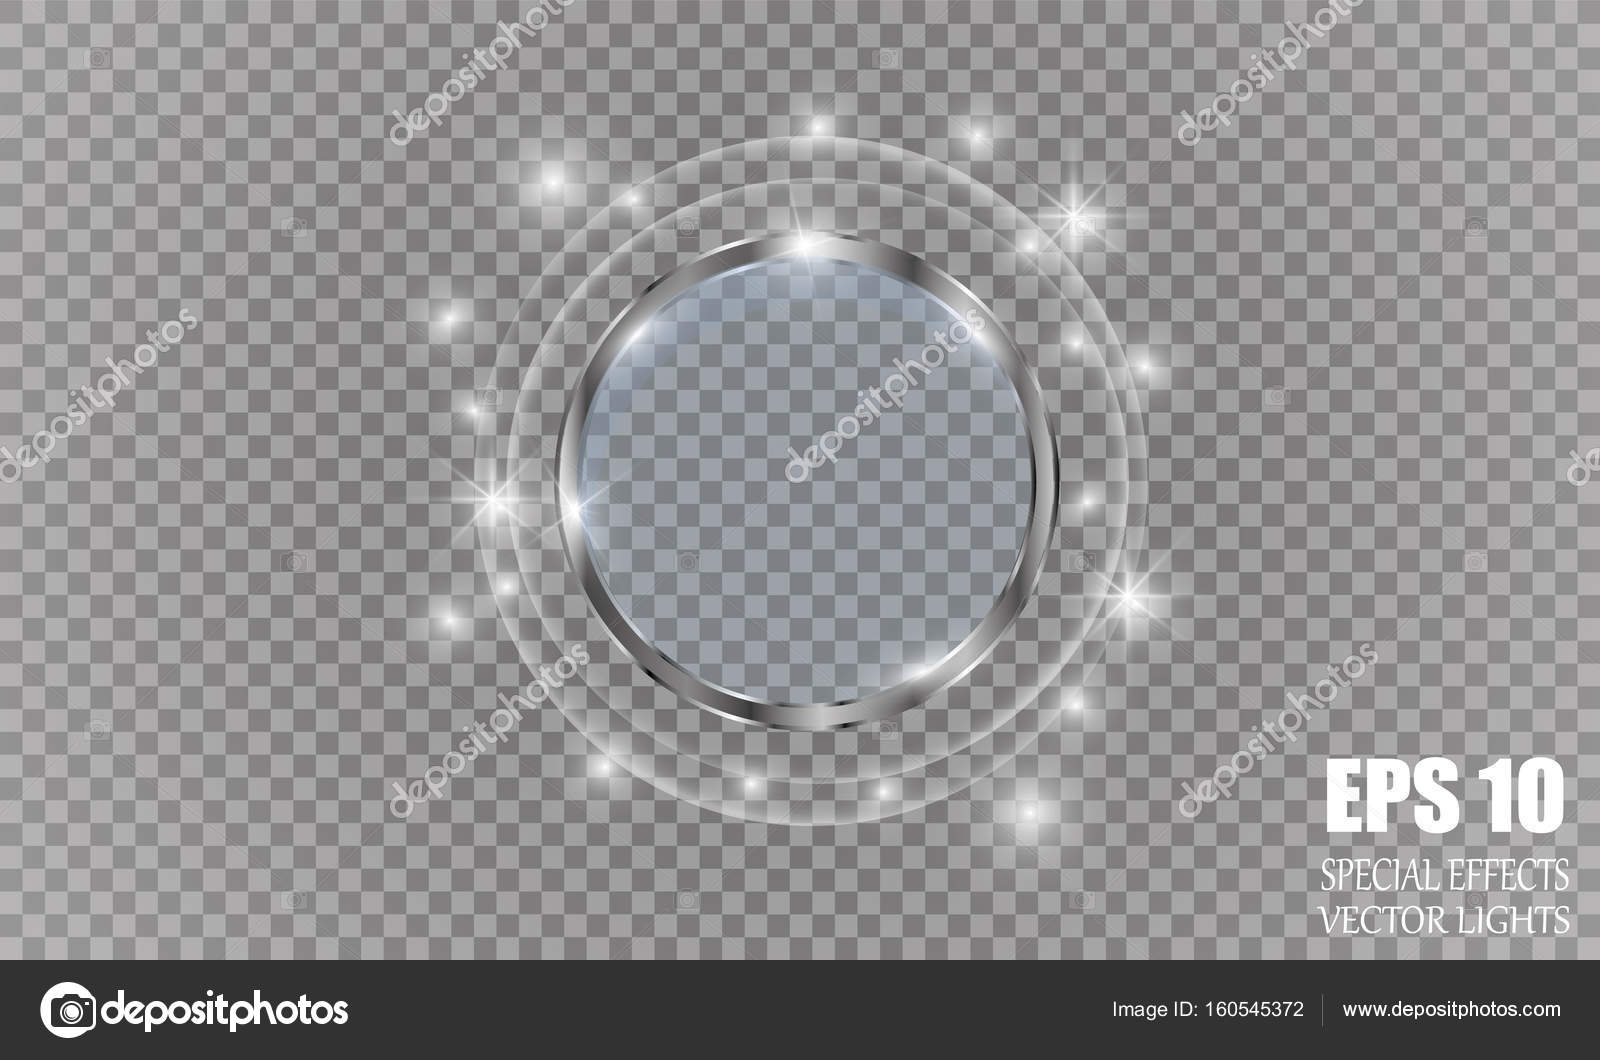 Shiny Chrome Bullet Against Gray Background Stock Photo - Download